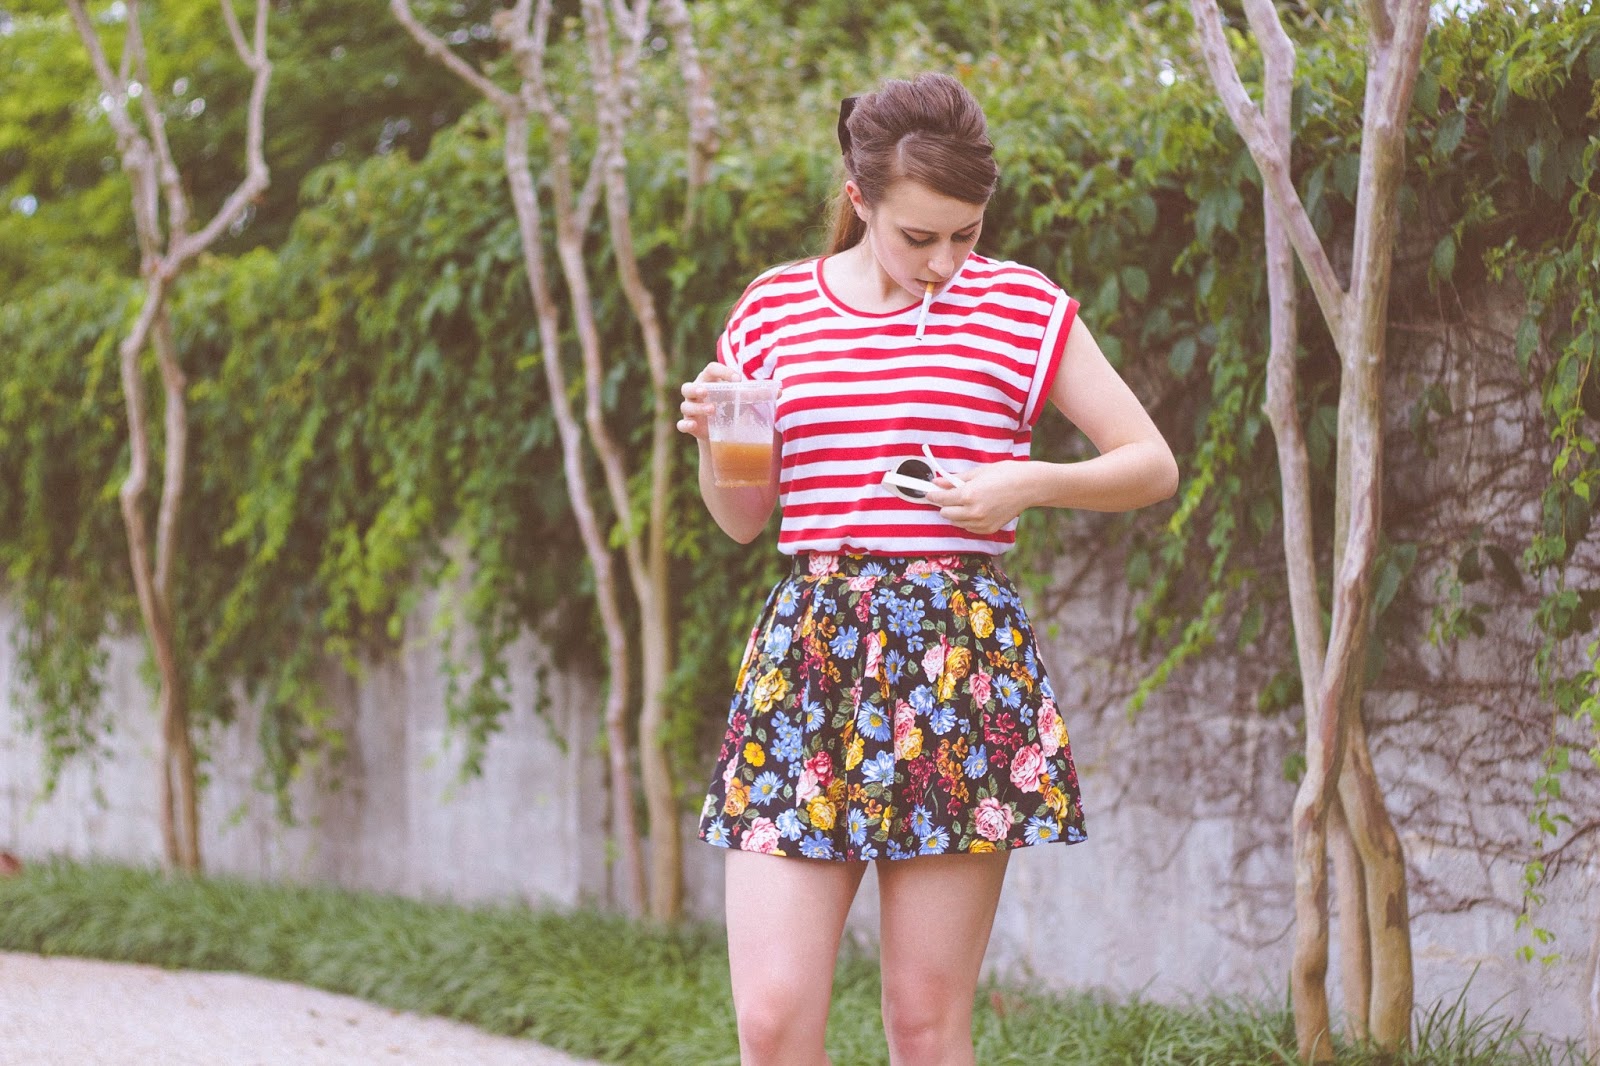 Mixing prints outfit, striped t shirt, floral mini skirt, forever 21, asos, retro style, 60's style, style, fashion, girly, french, lana del rey style, taylor swift style, personal style blogger, film blogger, movie blogger. cinema, vintage